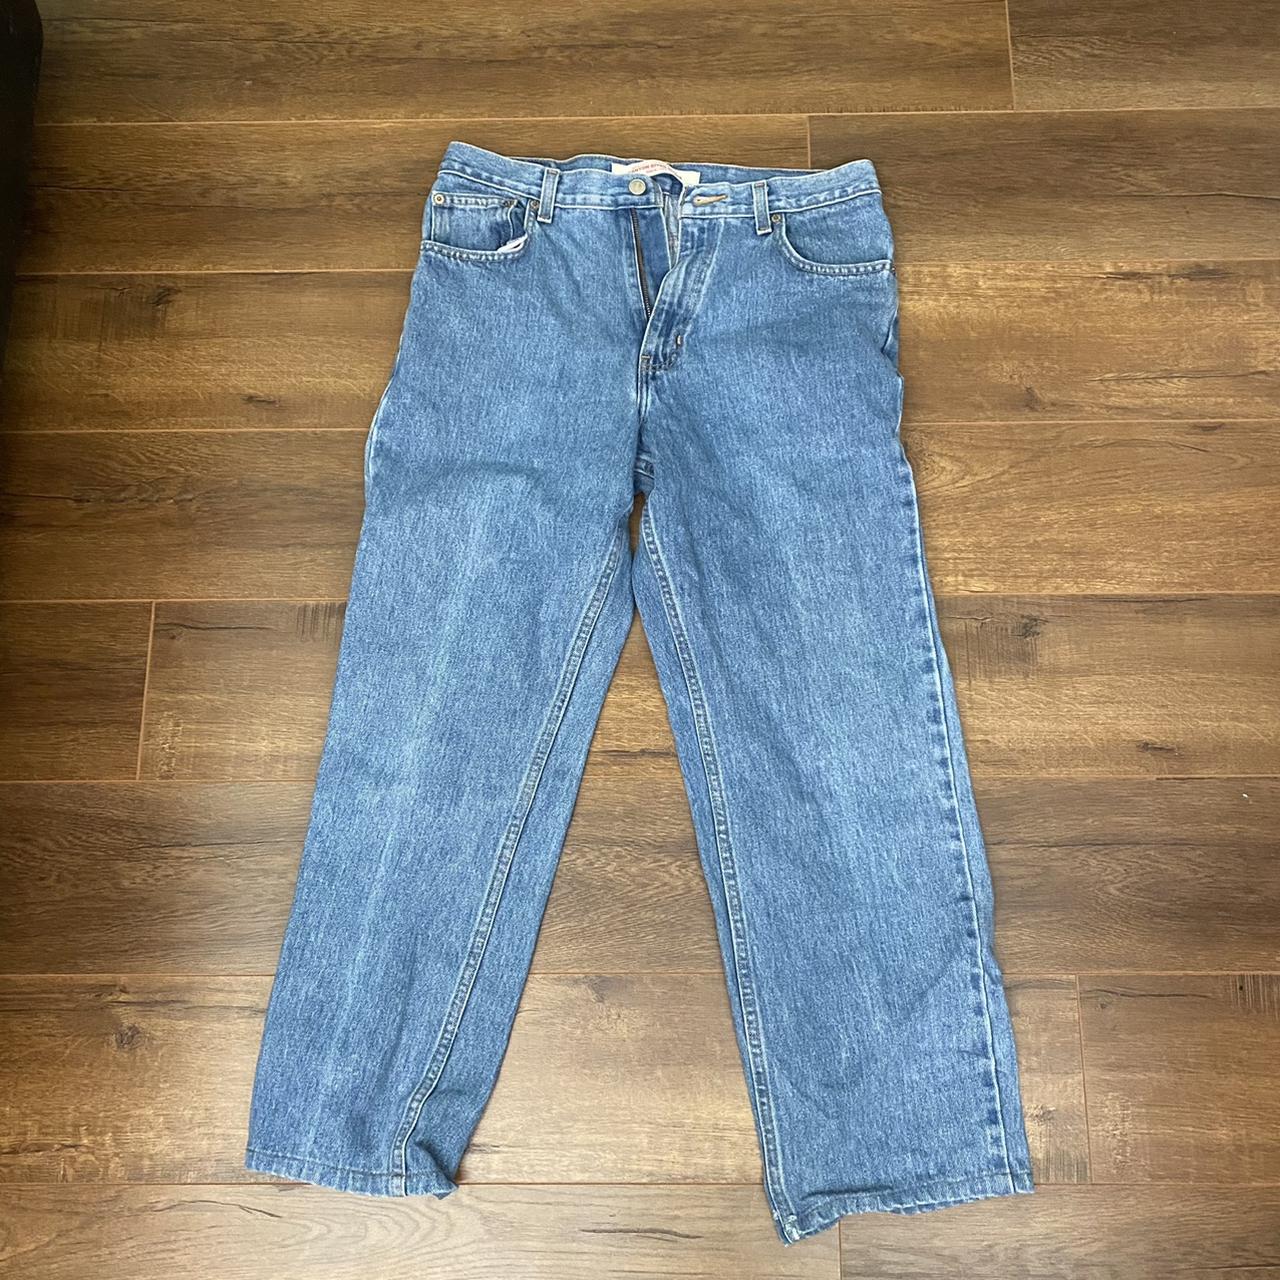 Canyon River Blues Men's Blue and Navy Jeans | Depop